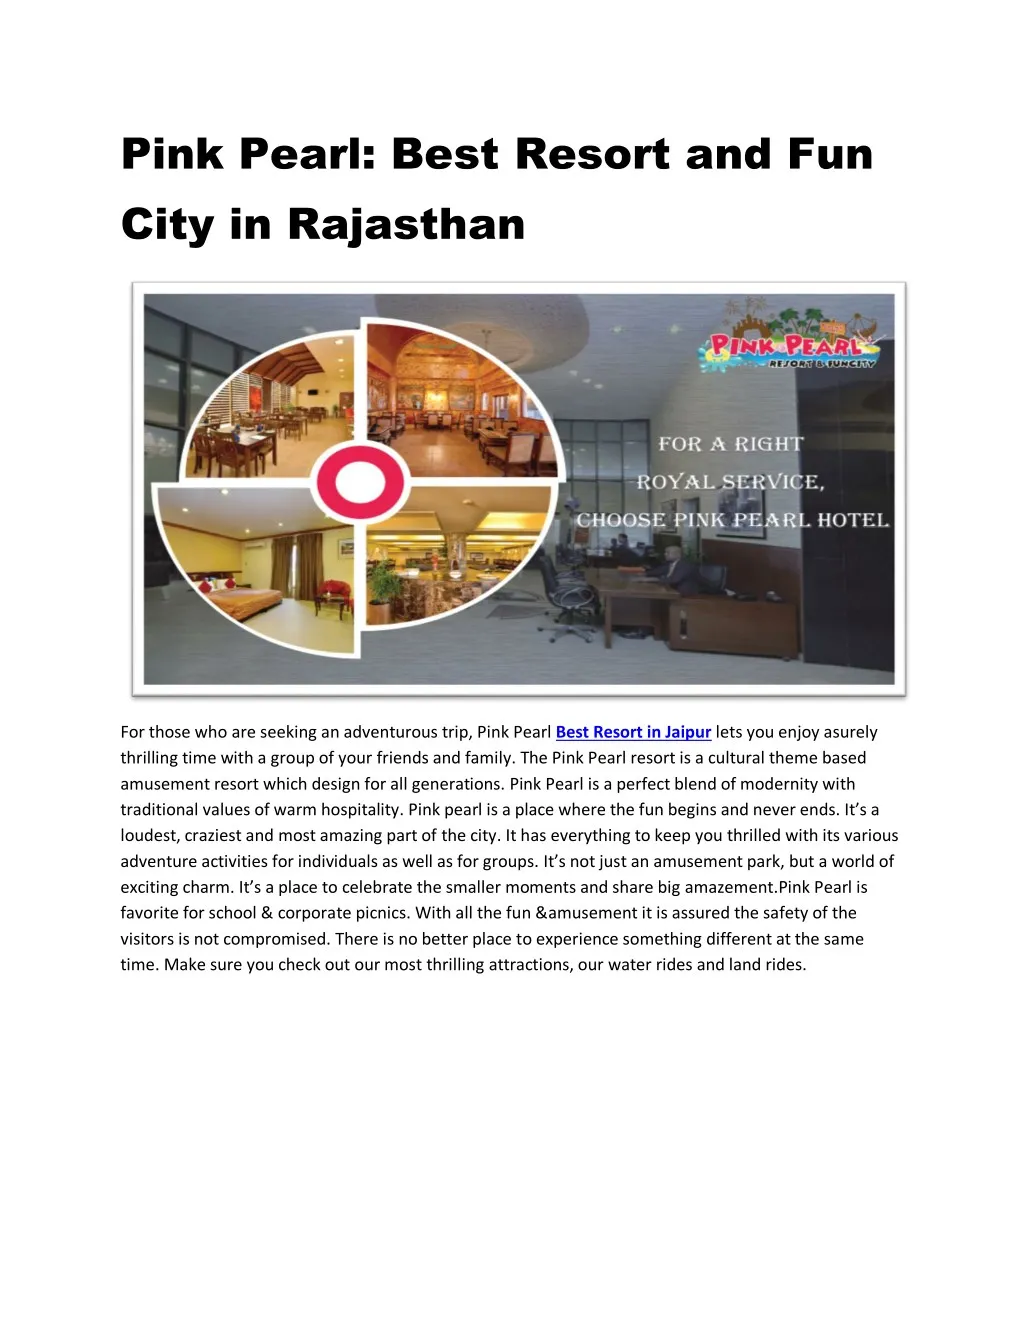 pink pearl best resort and fun city in rajasthan